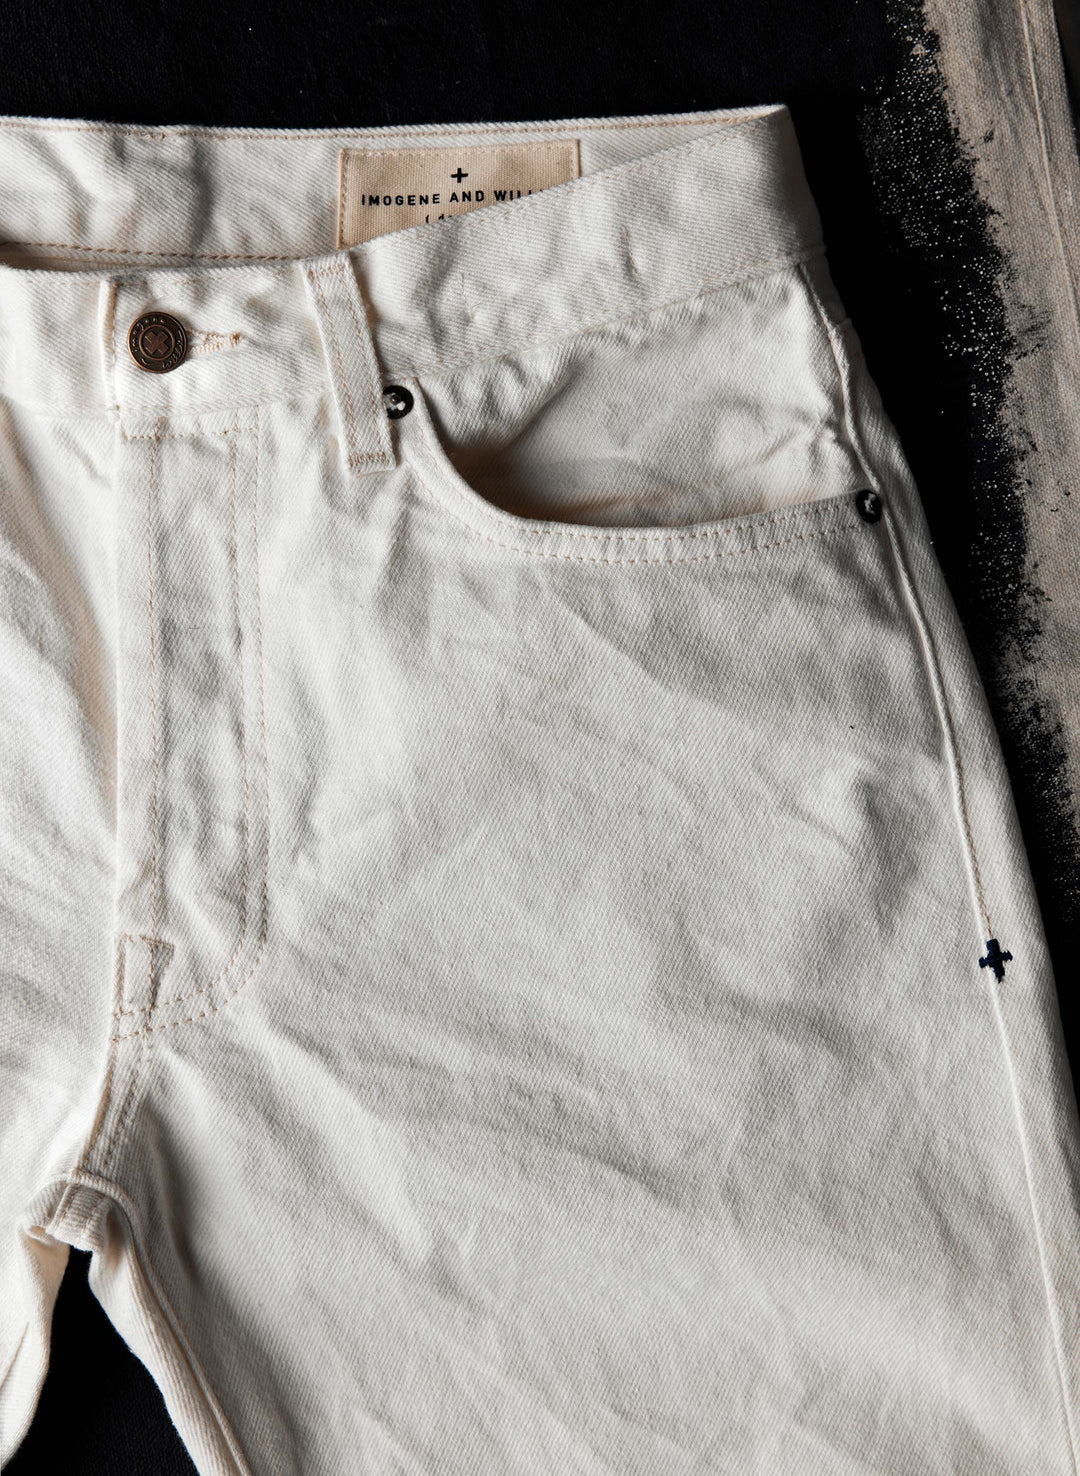 a close up of a pair of white jeans